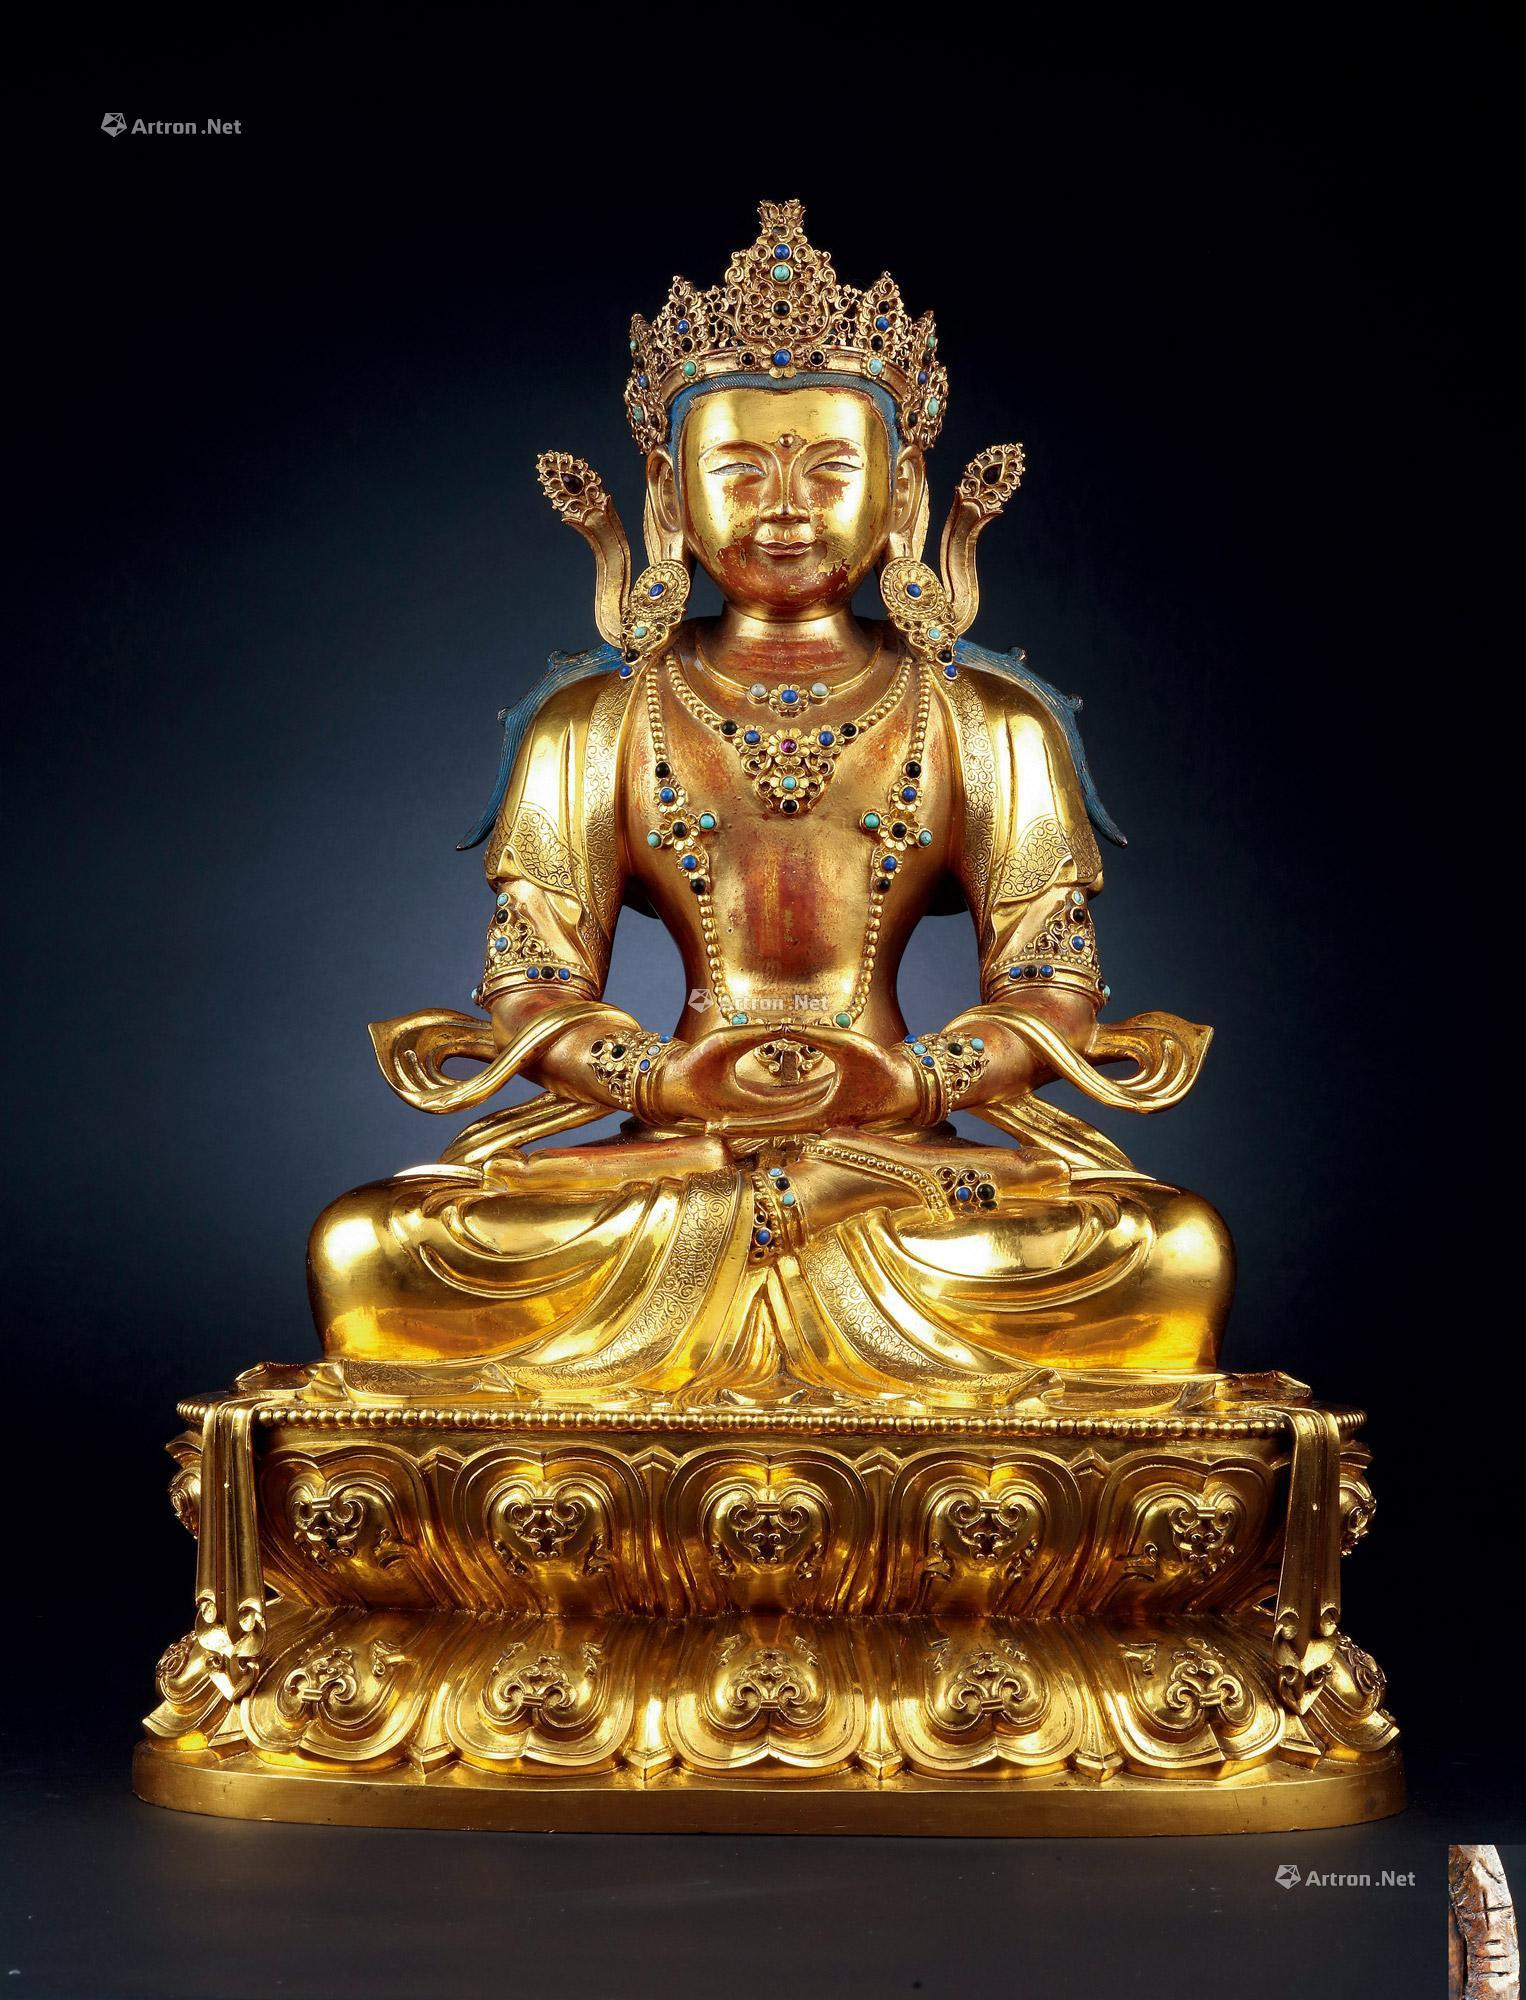 A SUPERB AND IMPORTANT IMPERIAL GILT-BRONZE FIGURE OF AMITAYUS